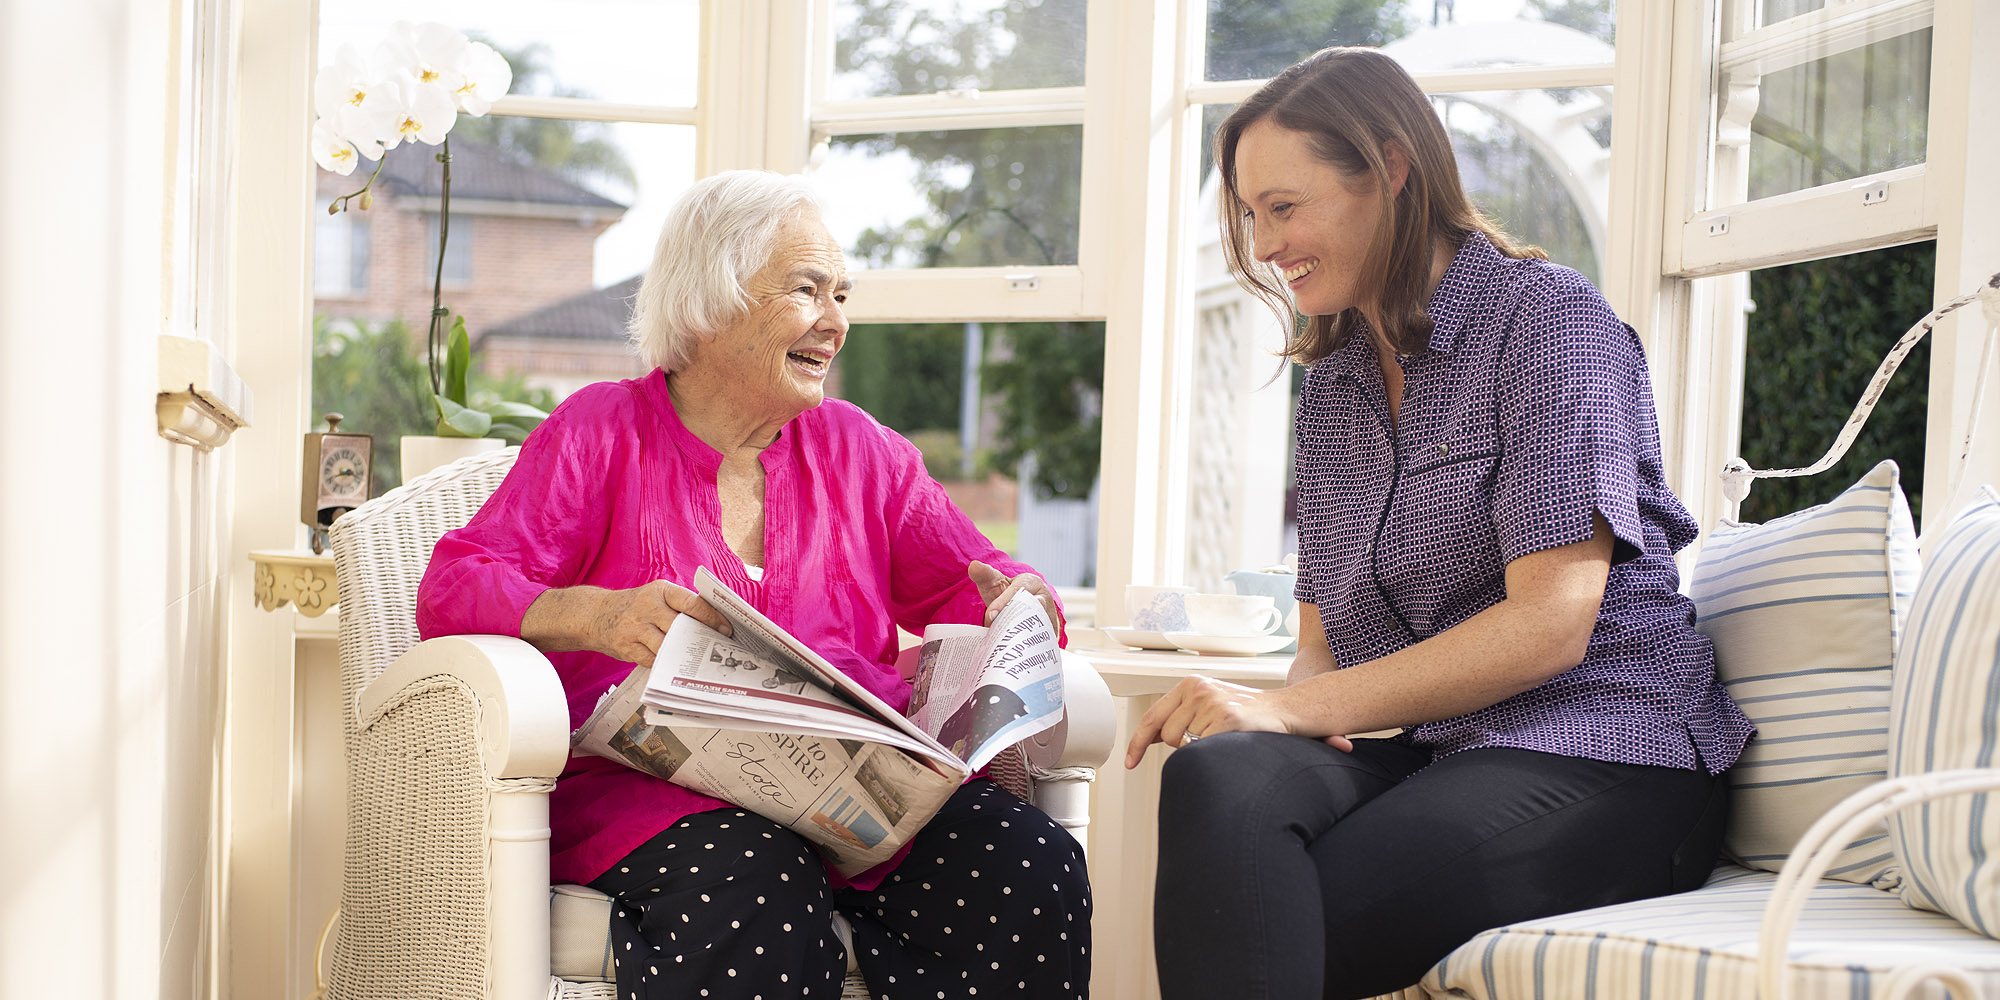 An older woman in a bright pink top sits on a lounge chair while holding a newspaper and chatting with her smiling KinCare home care worker who sits next to her.